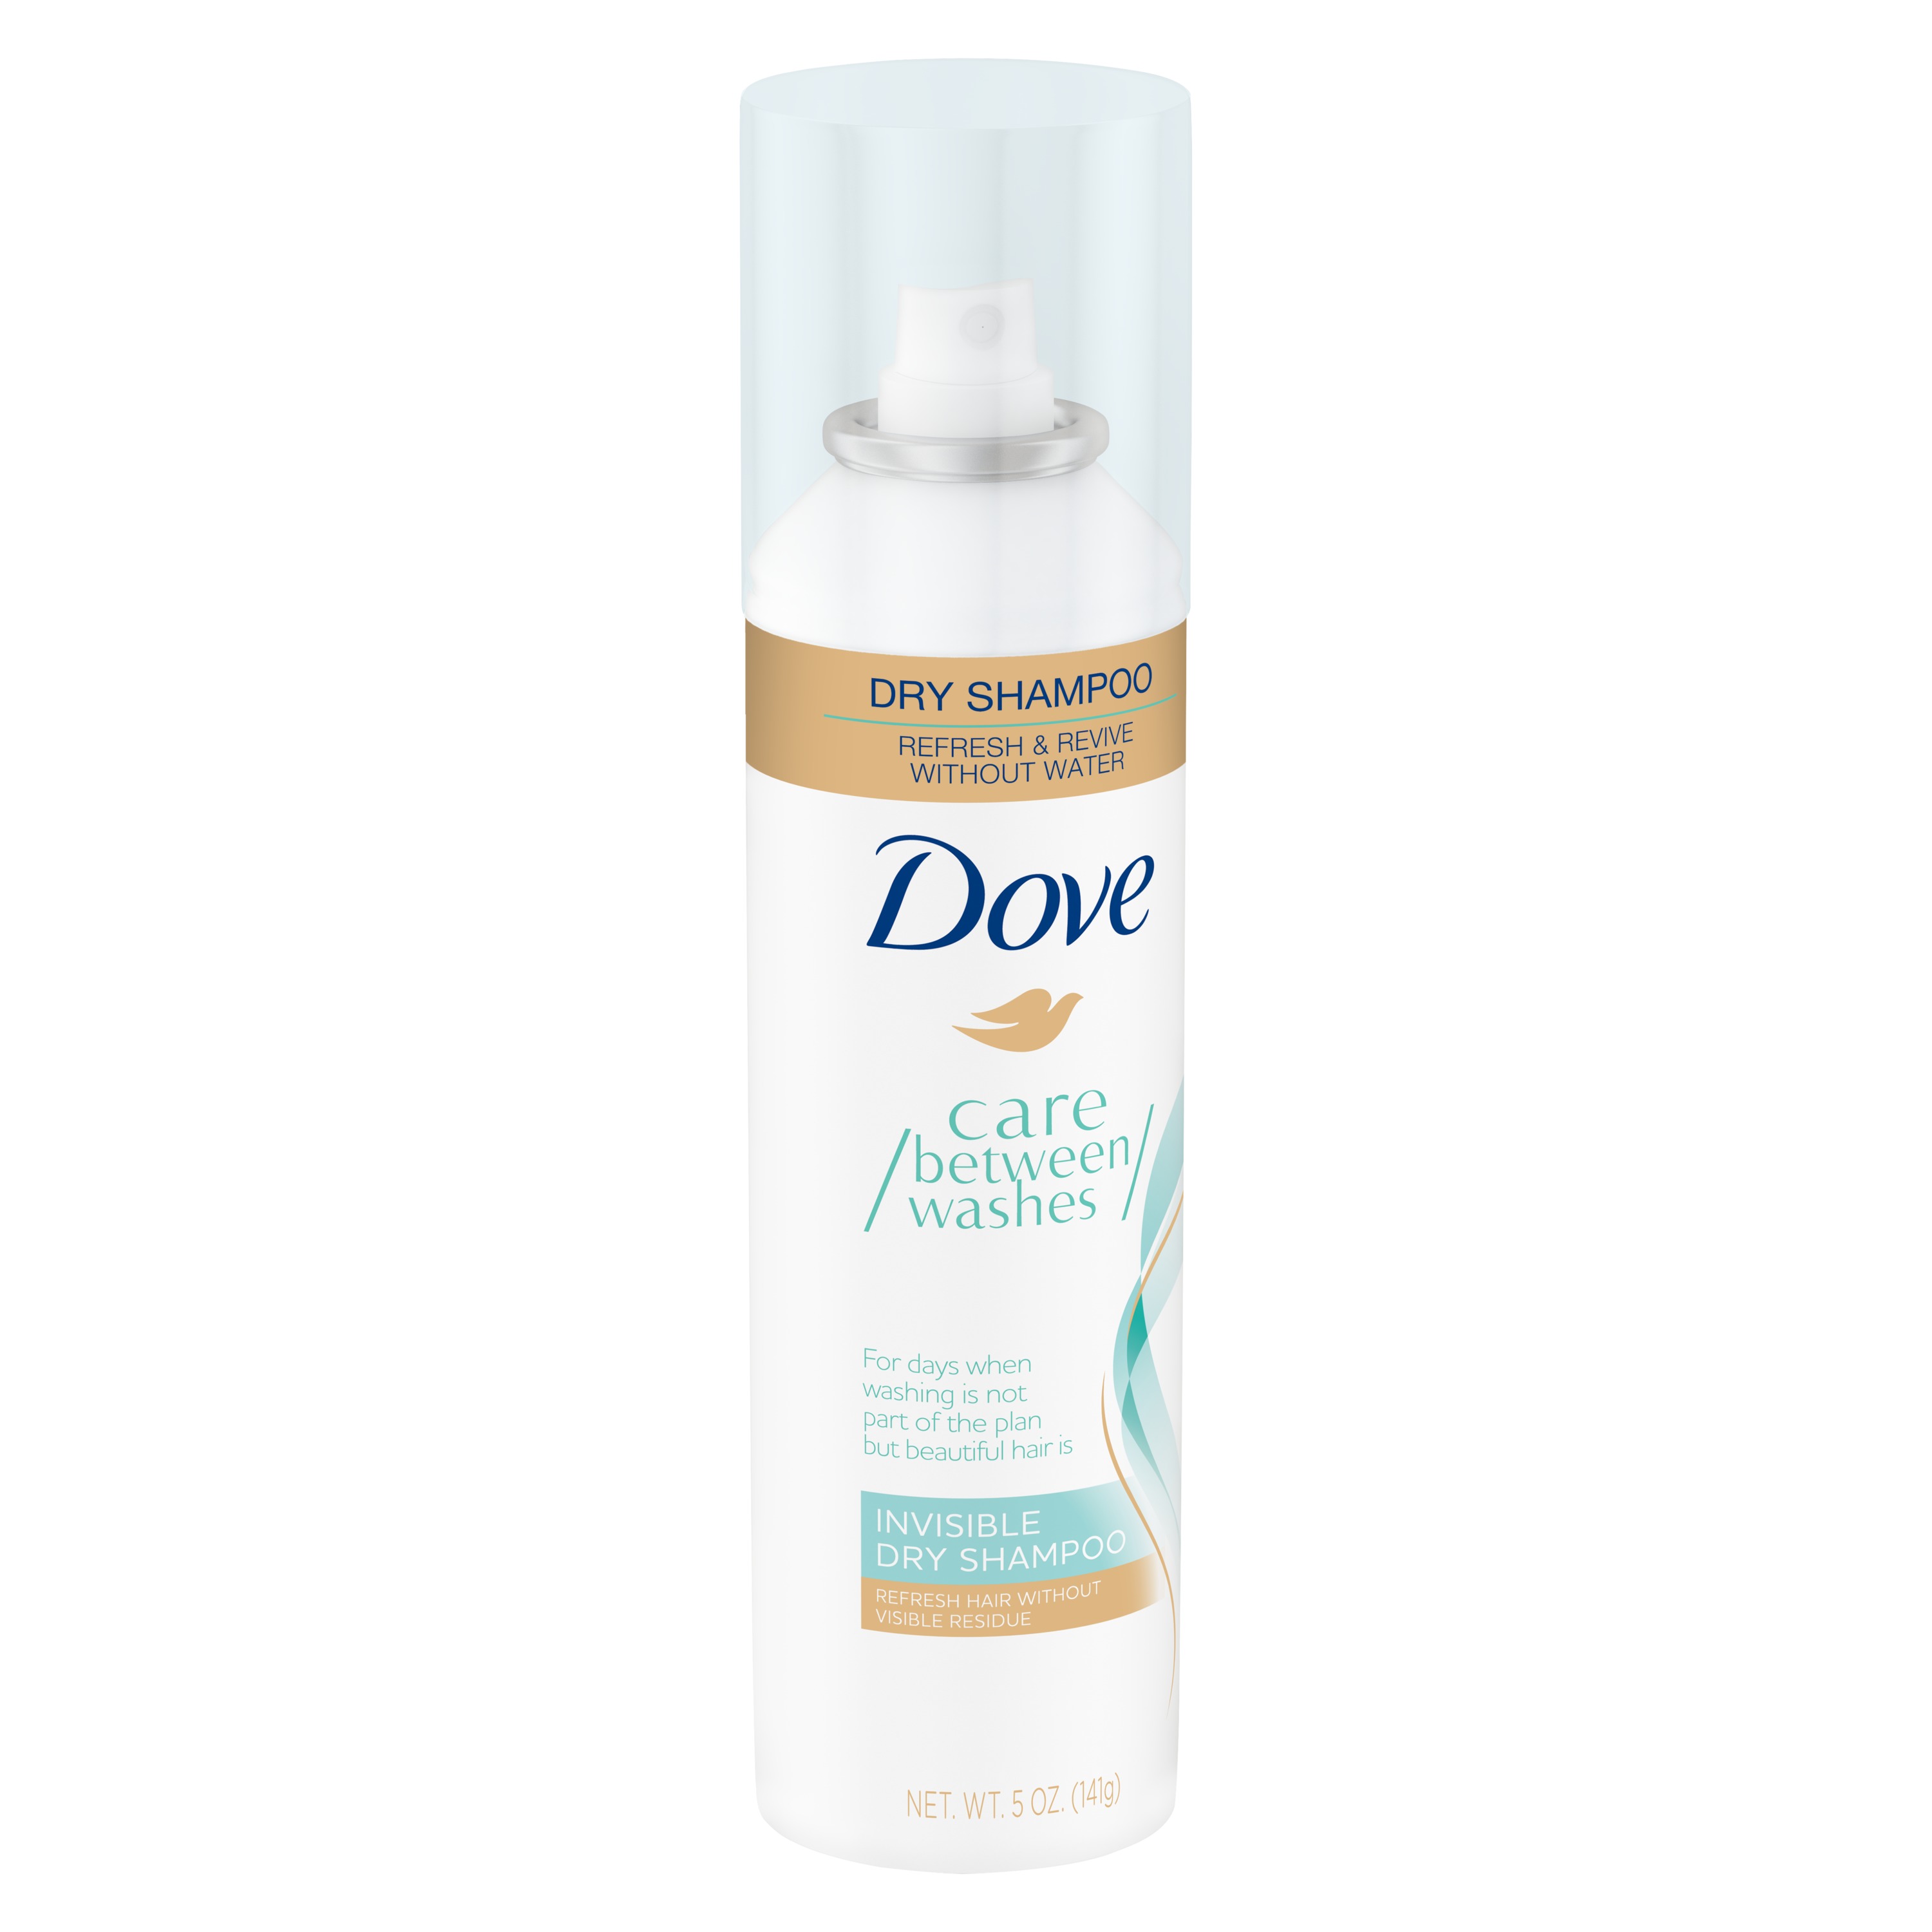 Dove Care Between Washes Dry Shampoo Invisible, 5 oz - image 8 of 10